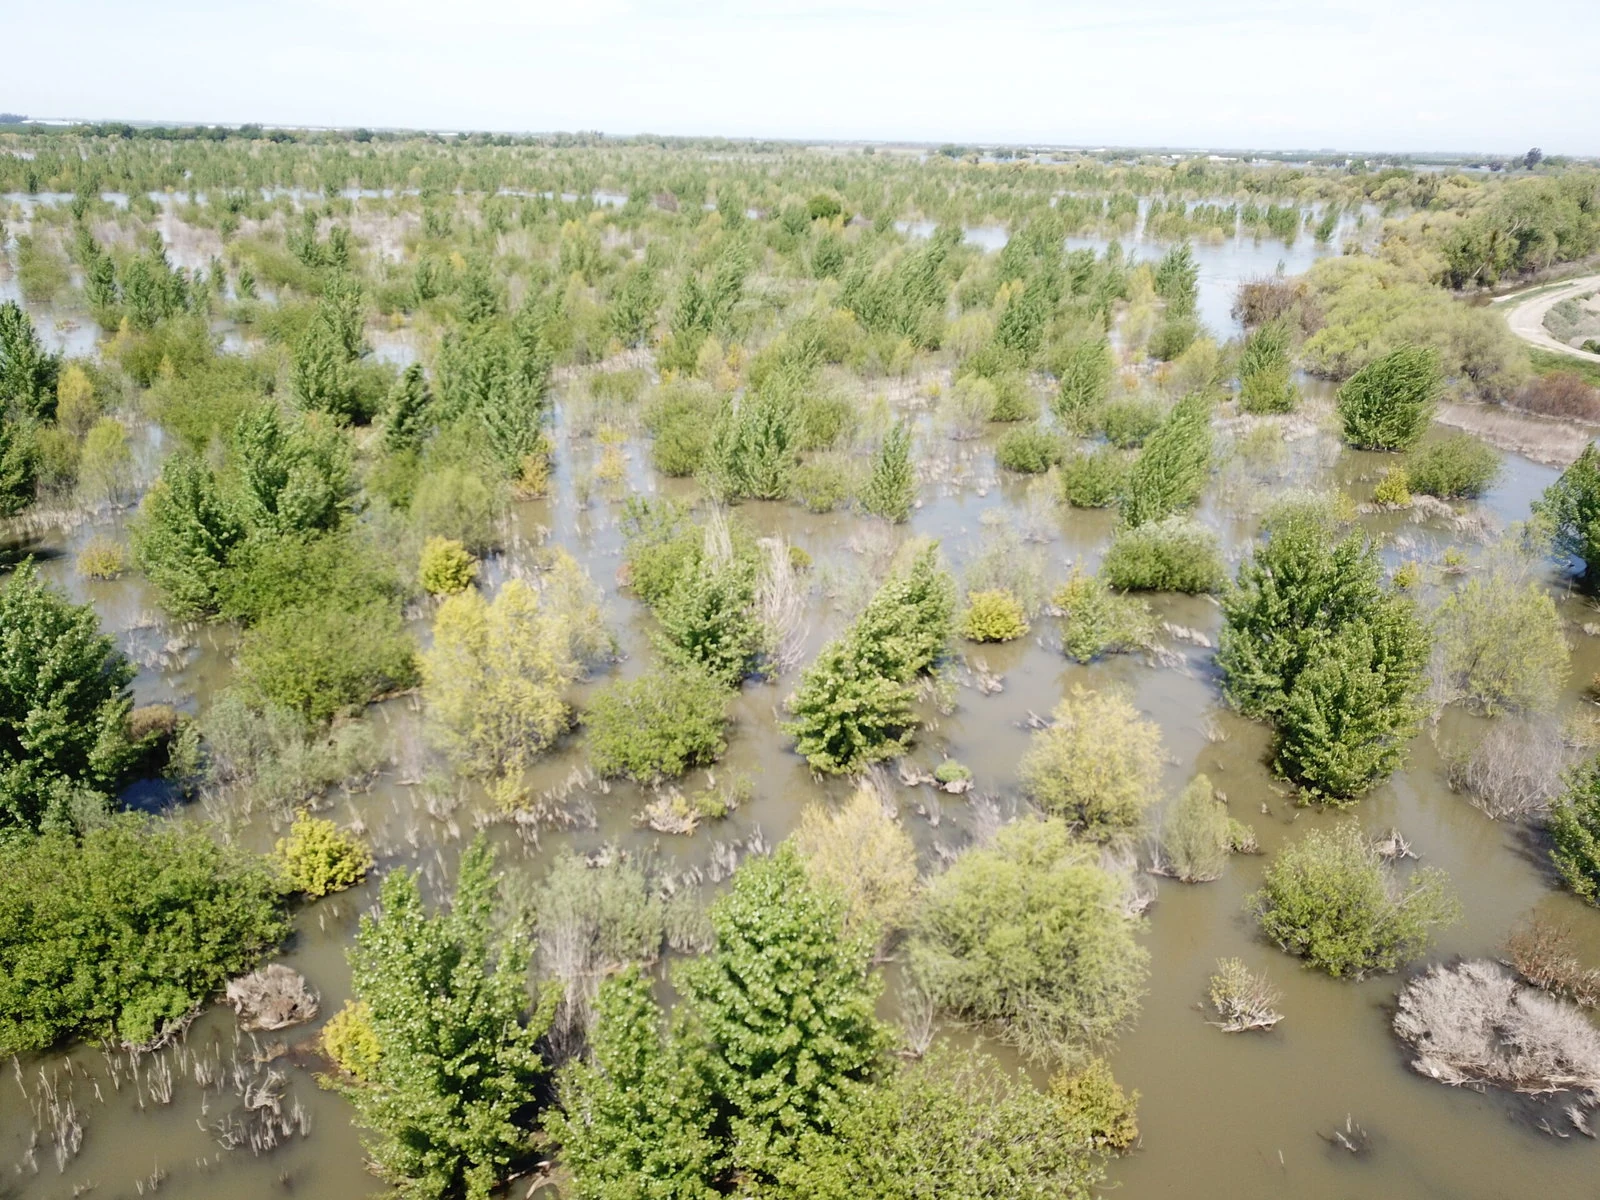 Dos Rios flooding with plants visible in the water.